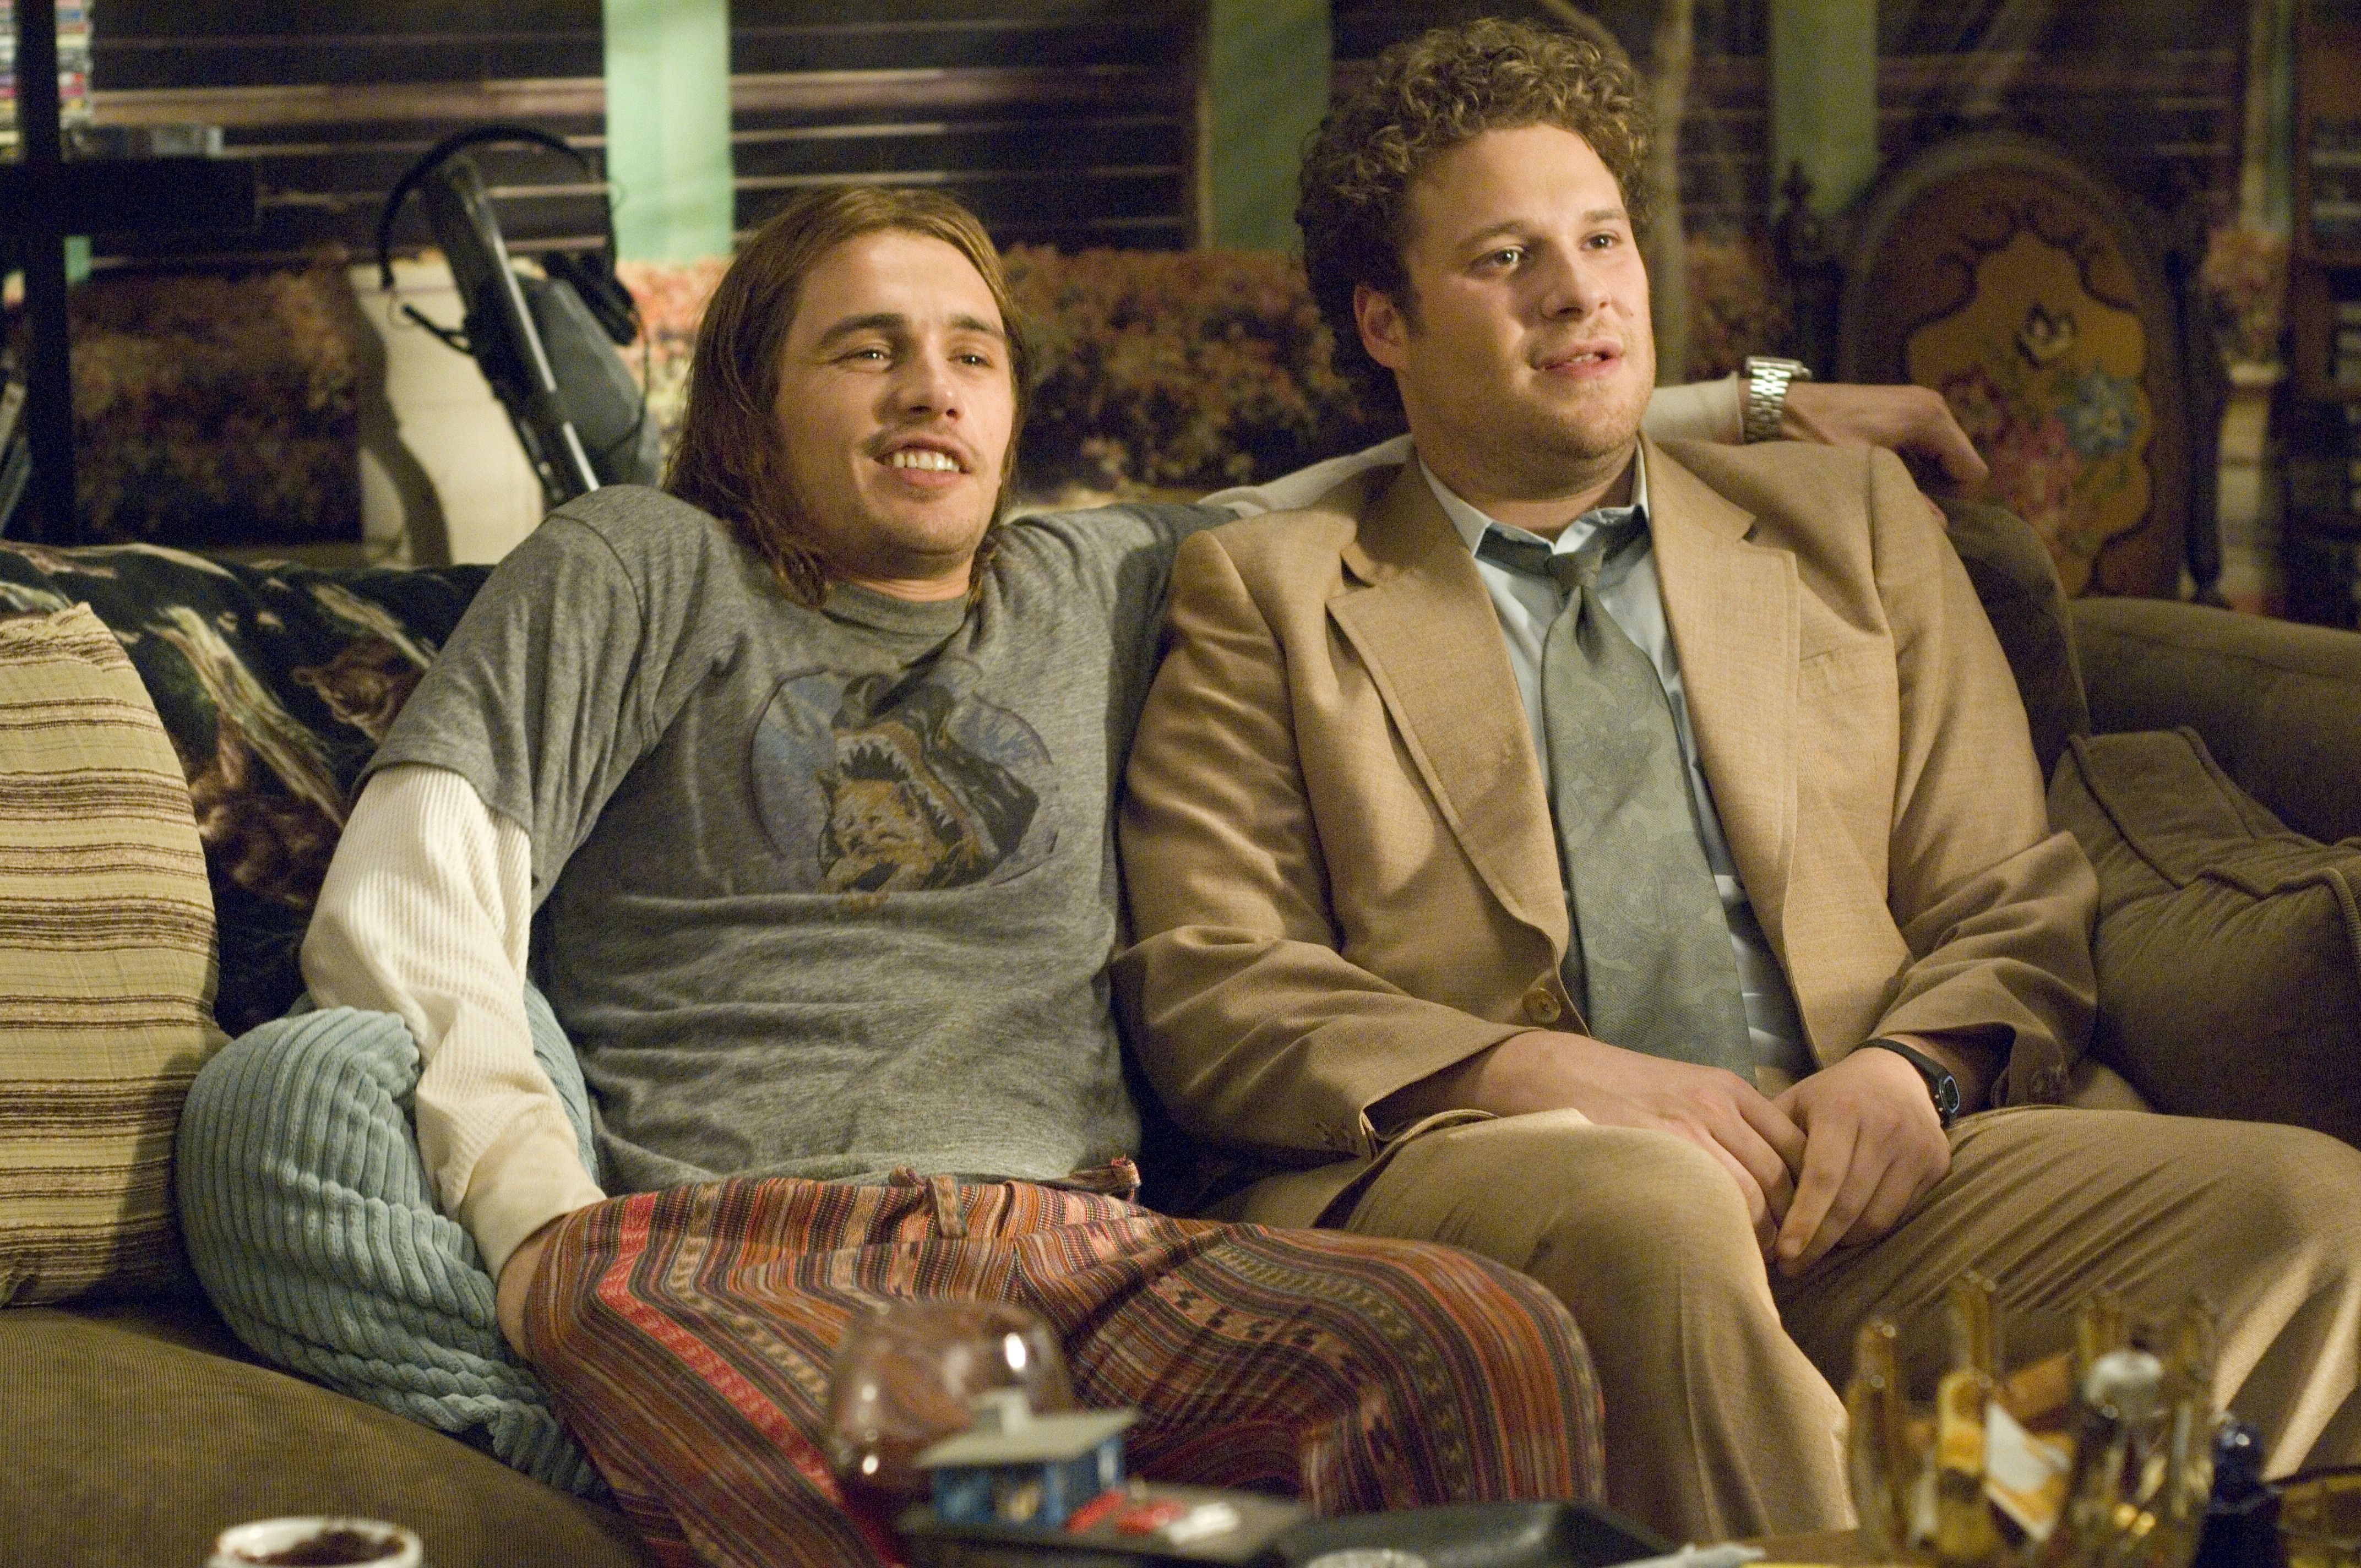 pineapple express full movie online free watch